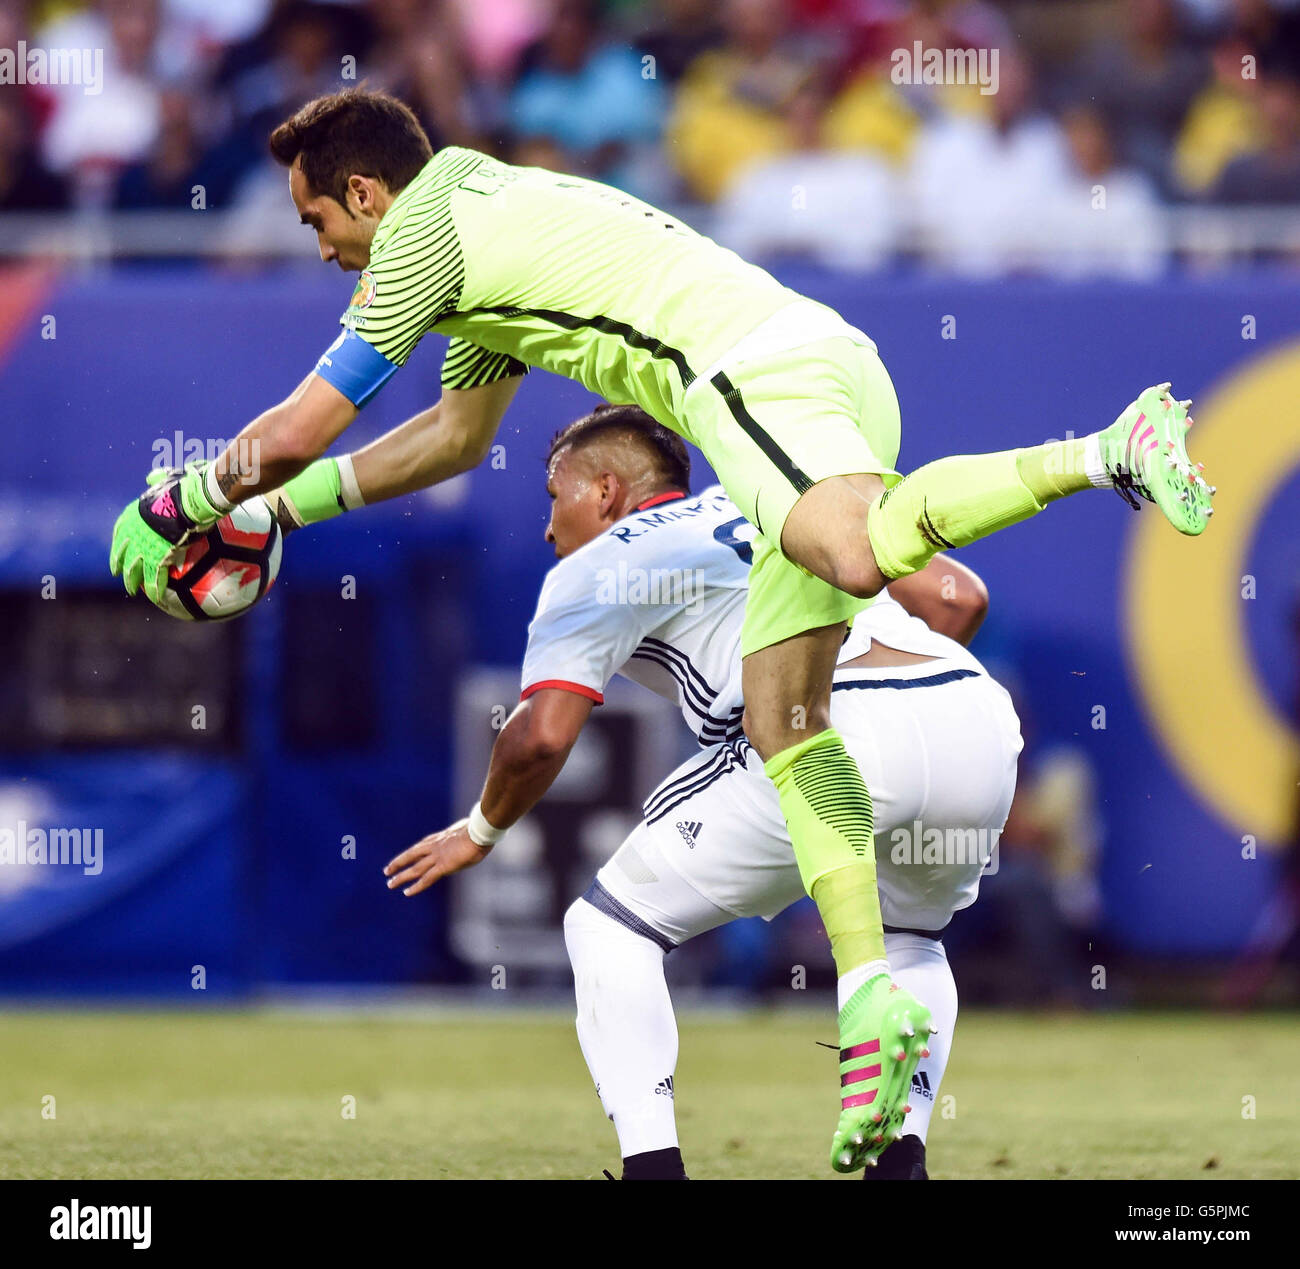 Chicago, USA. 22nd June, 2016. Colombia's Claudio Bravo (Top) competes during the Copa America Centenario semifinal football match against Chile in Chicago, Illinois, the United States, on June 22, 2016. Credit:  Bao Dandan/Xinhua/Alamy Live News Stock Photo